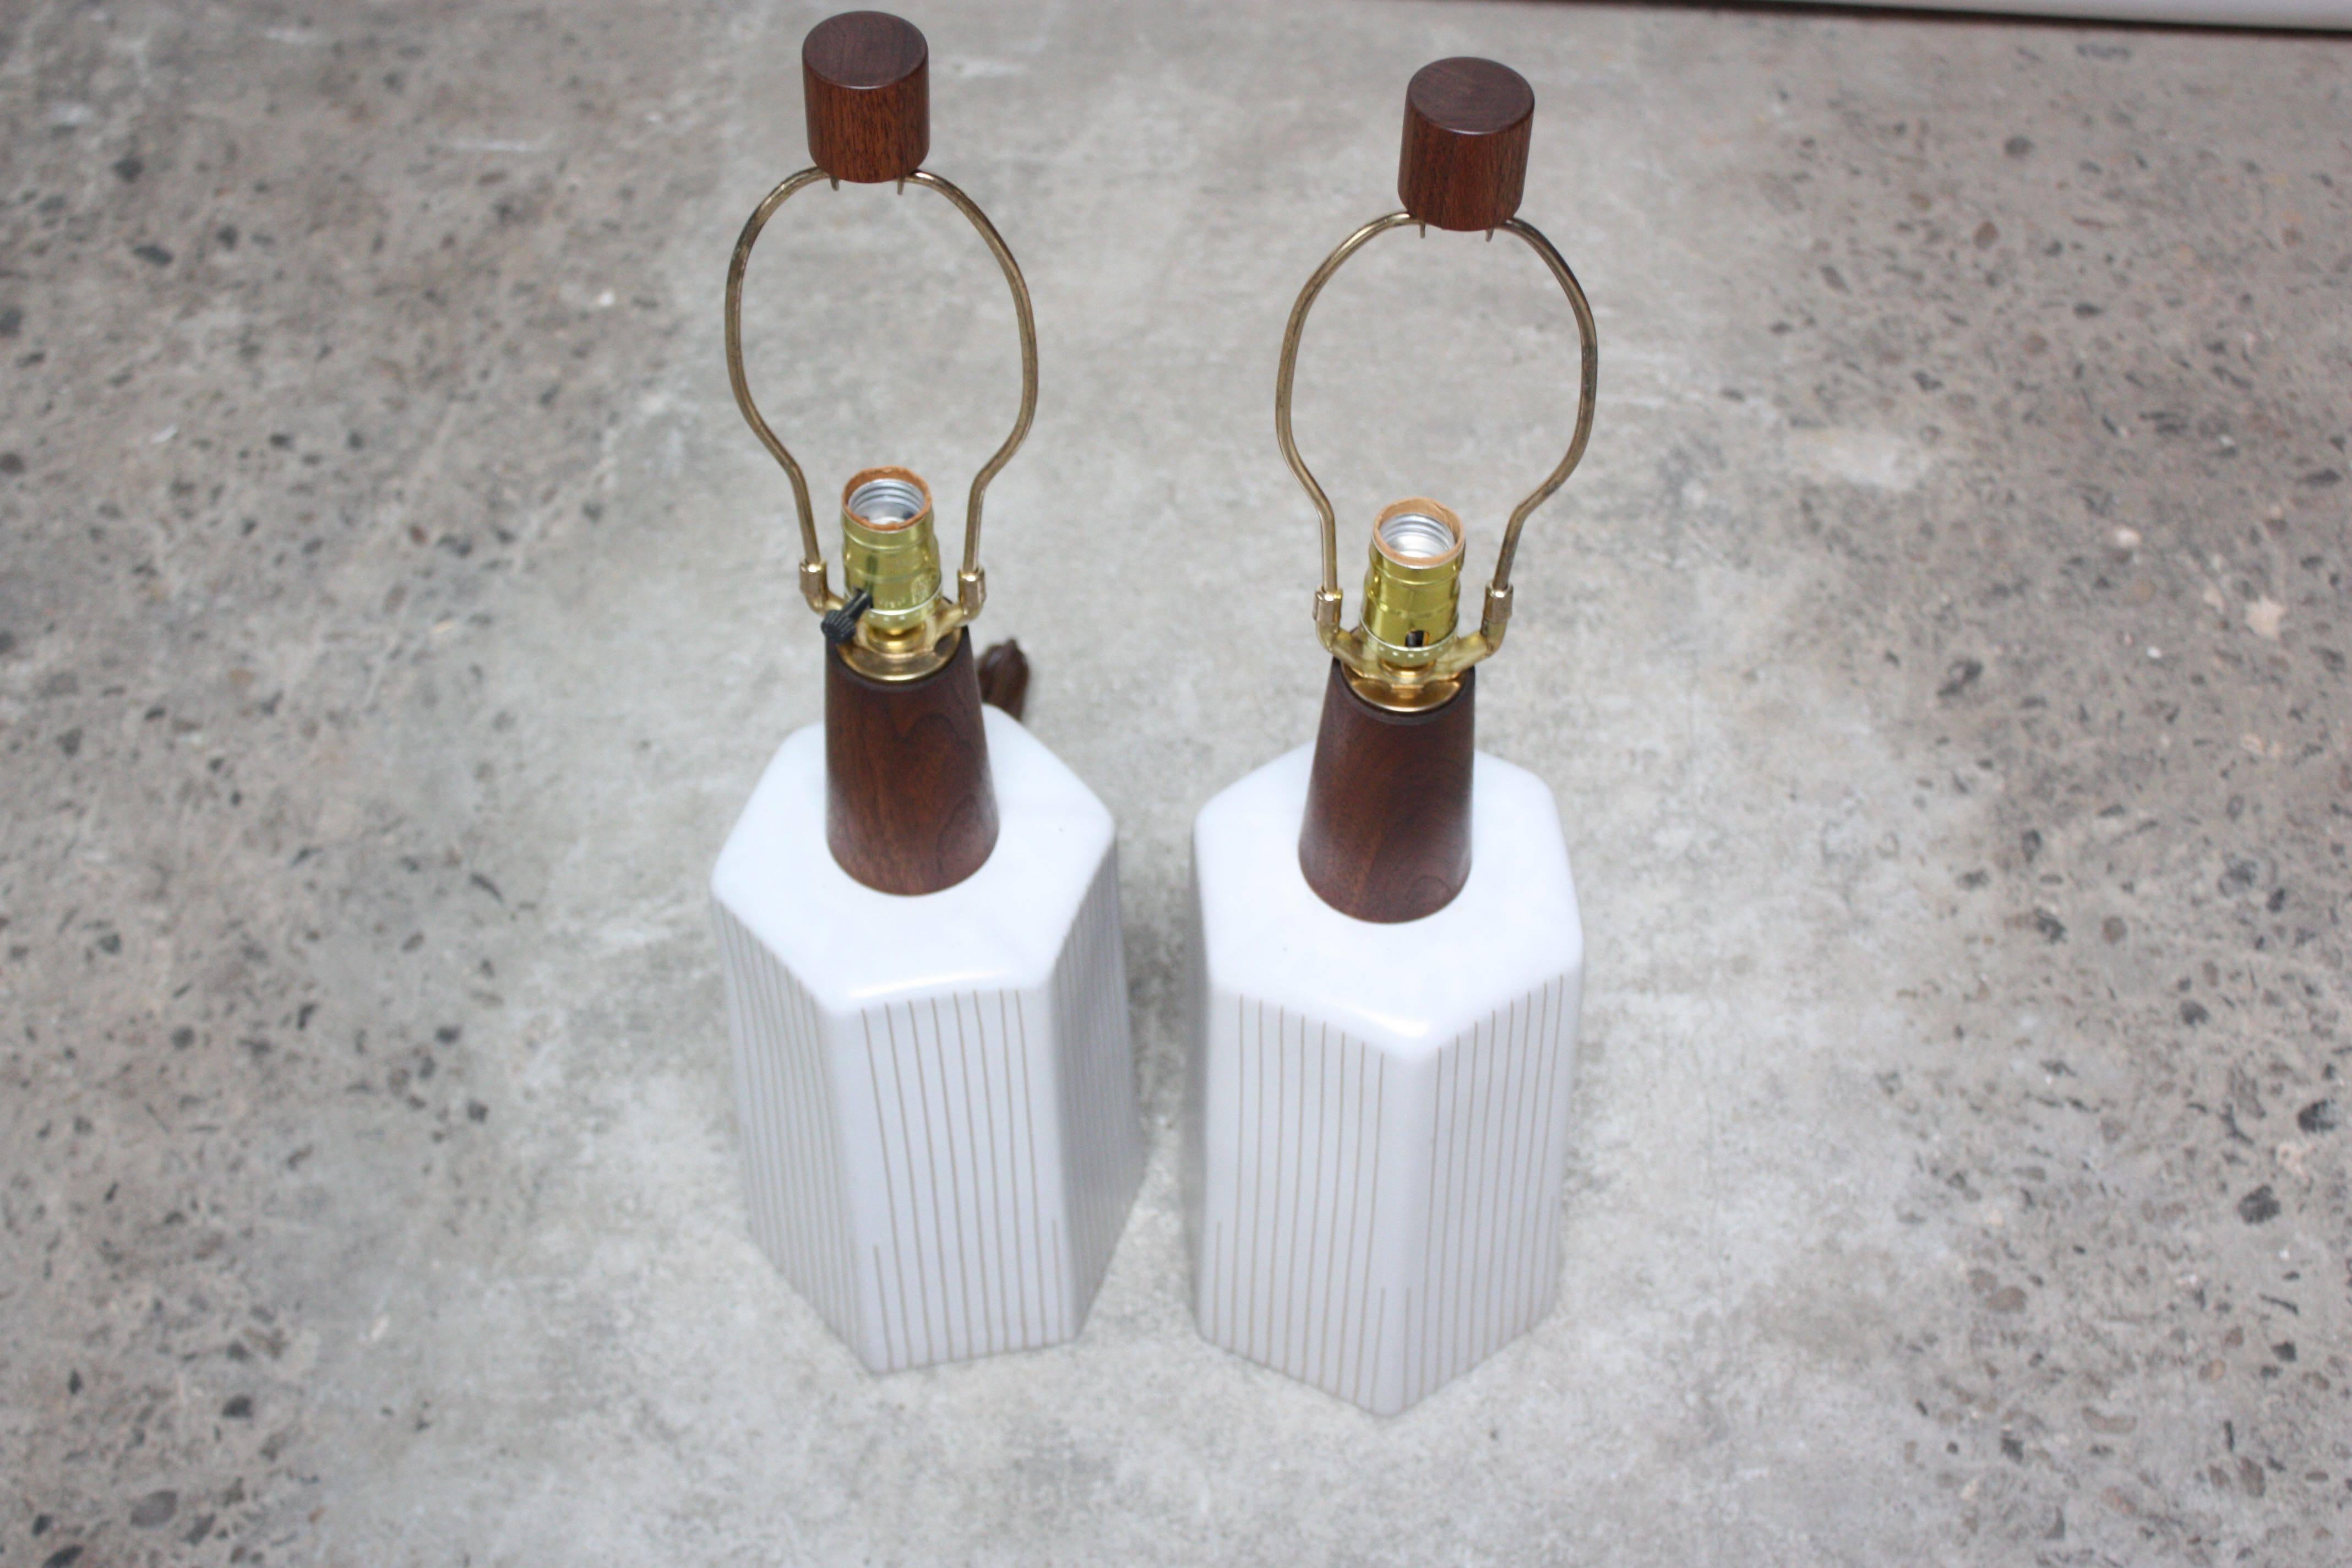 Turned Pair of Hexagonal Table Lamps by Gordon and Jane Martz for Marshall Studios